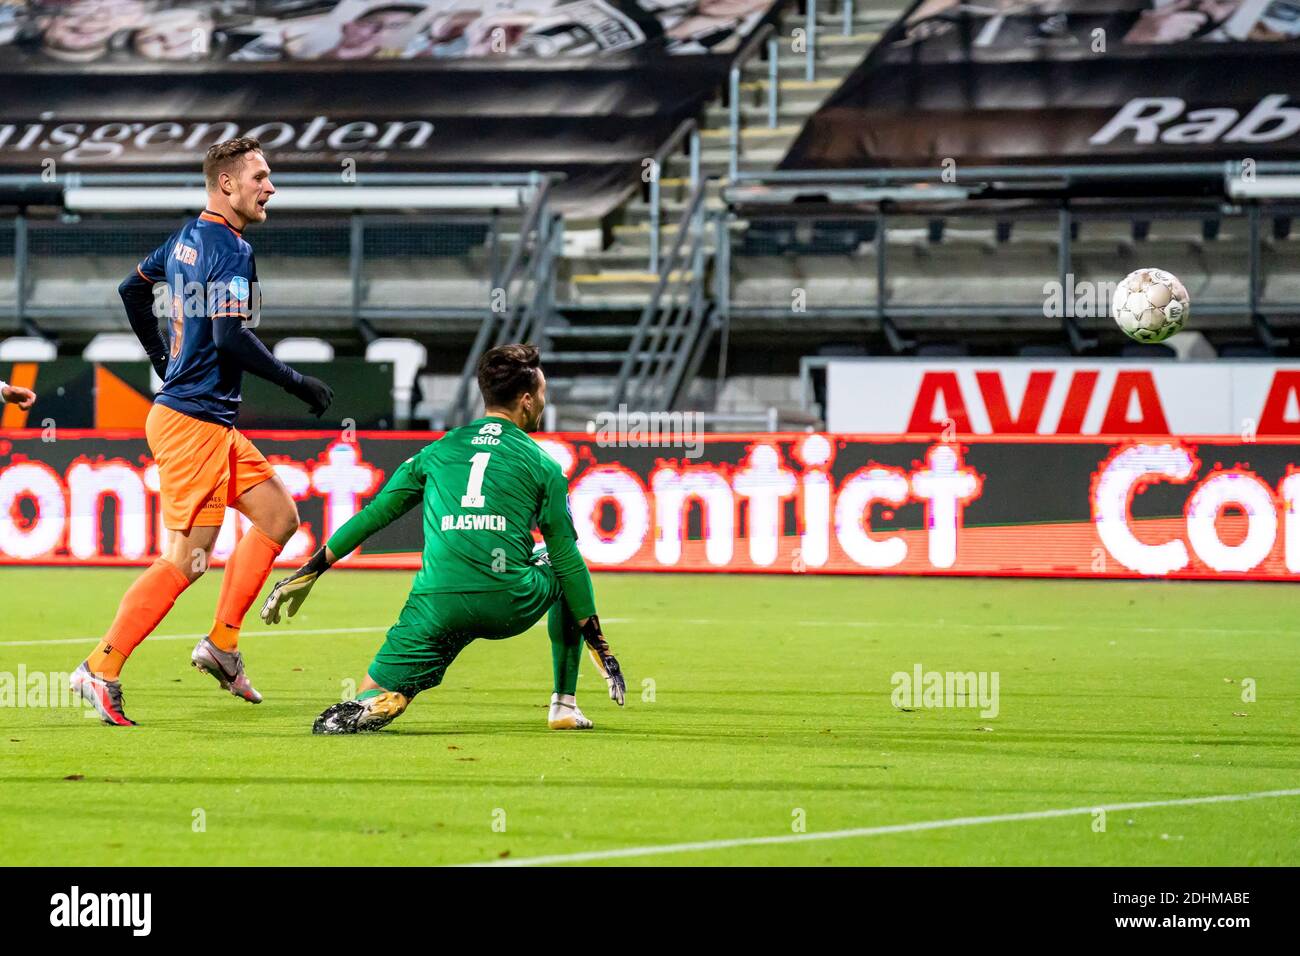 ALMELO, Netherlands. 11th Dec, 2020. football, Dutch eredivisie, season 2020/2021, Fortuna Sittard player Sebastian Polter scores the 0-2 during the match Heracles - Fortuna Sittard Credit: Pro Shots/Alamy Live News Stock Photo